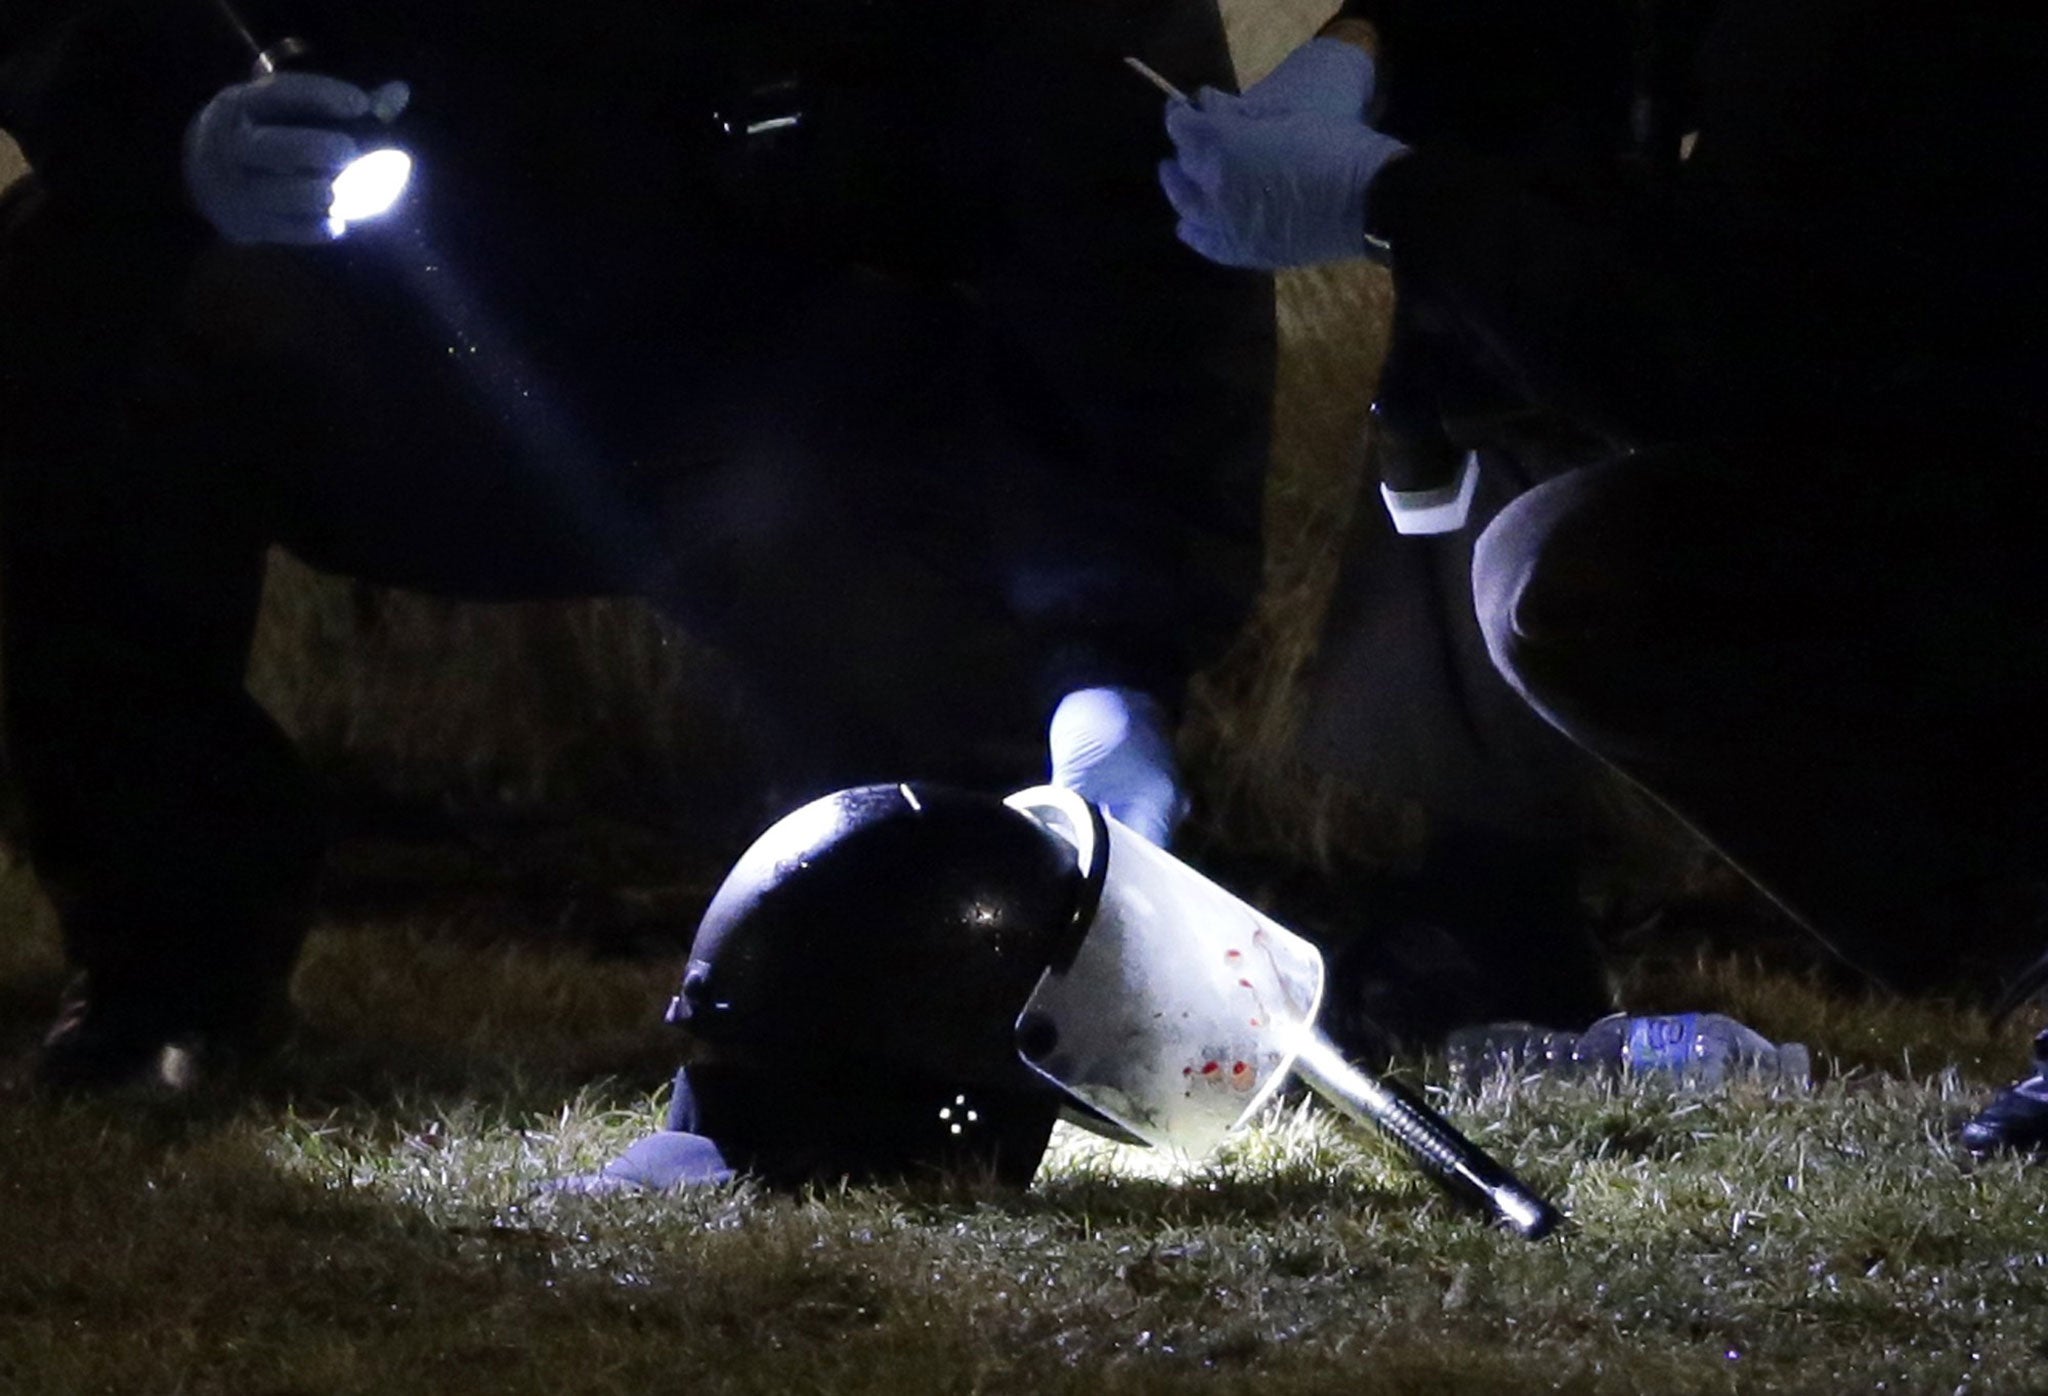 Police examine a blood-stained helmet after the shooting in Ferguson, Missouri